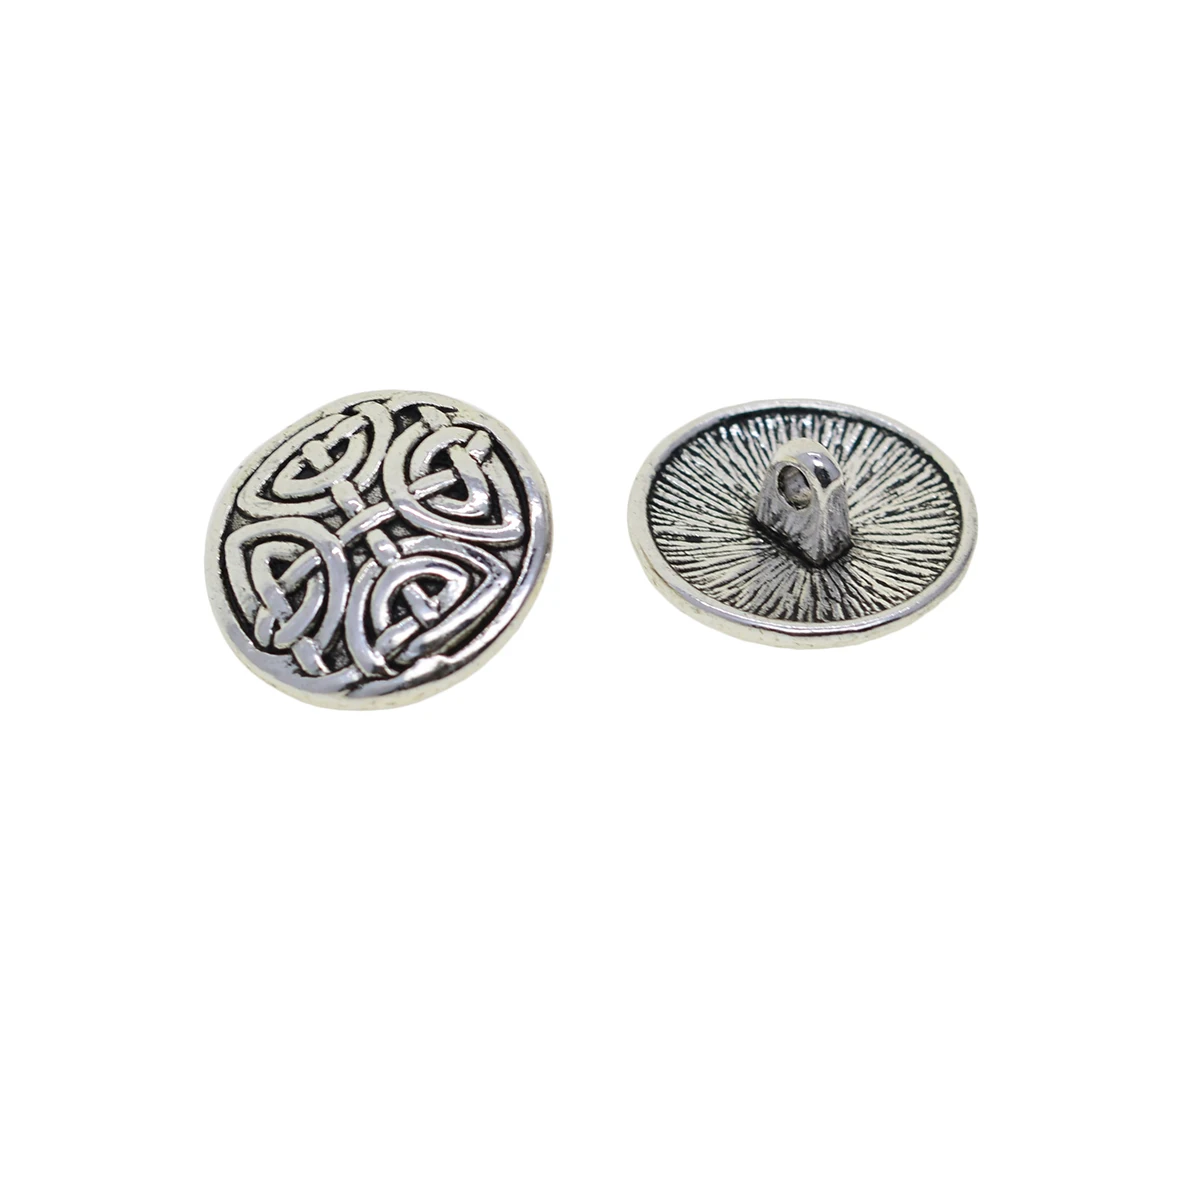 20 Pcs 17mm 0.7inch Tibetan silver  round maze Garment Clothing Fastening 1 hole Sewing Buttons jewelry DIY